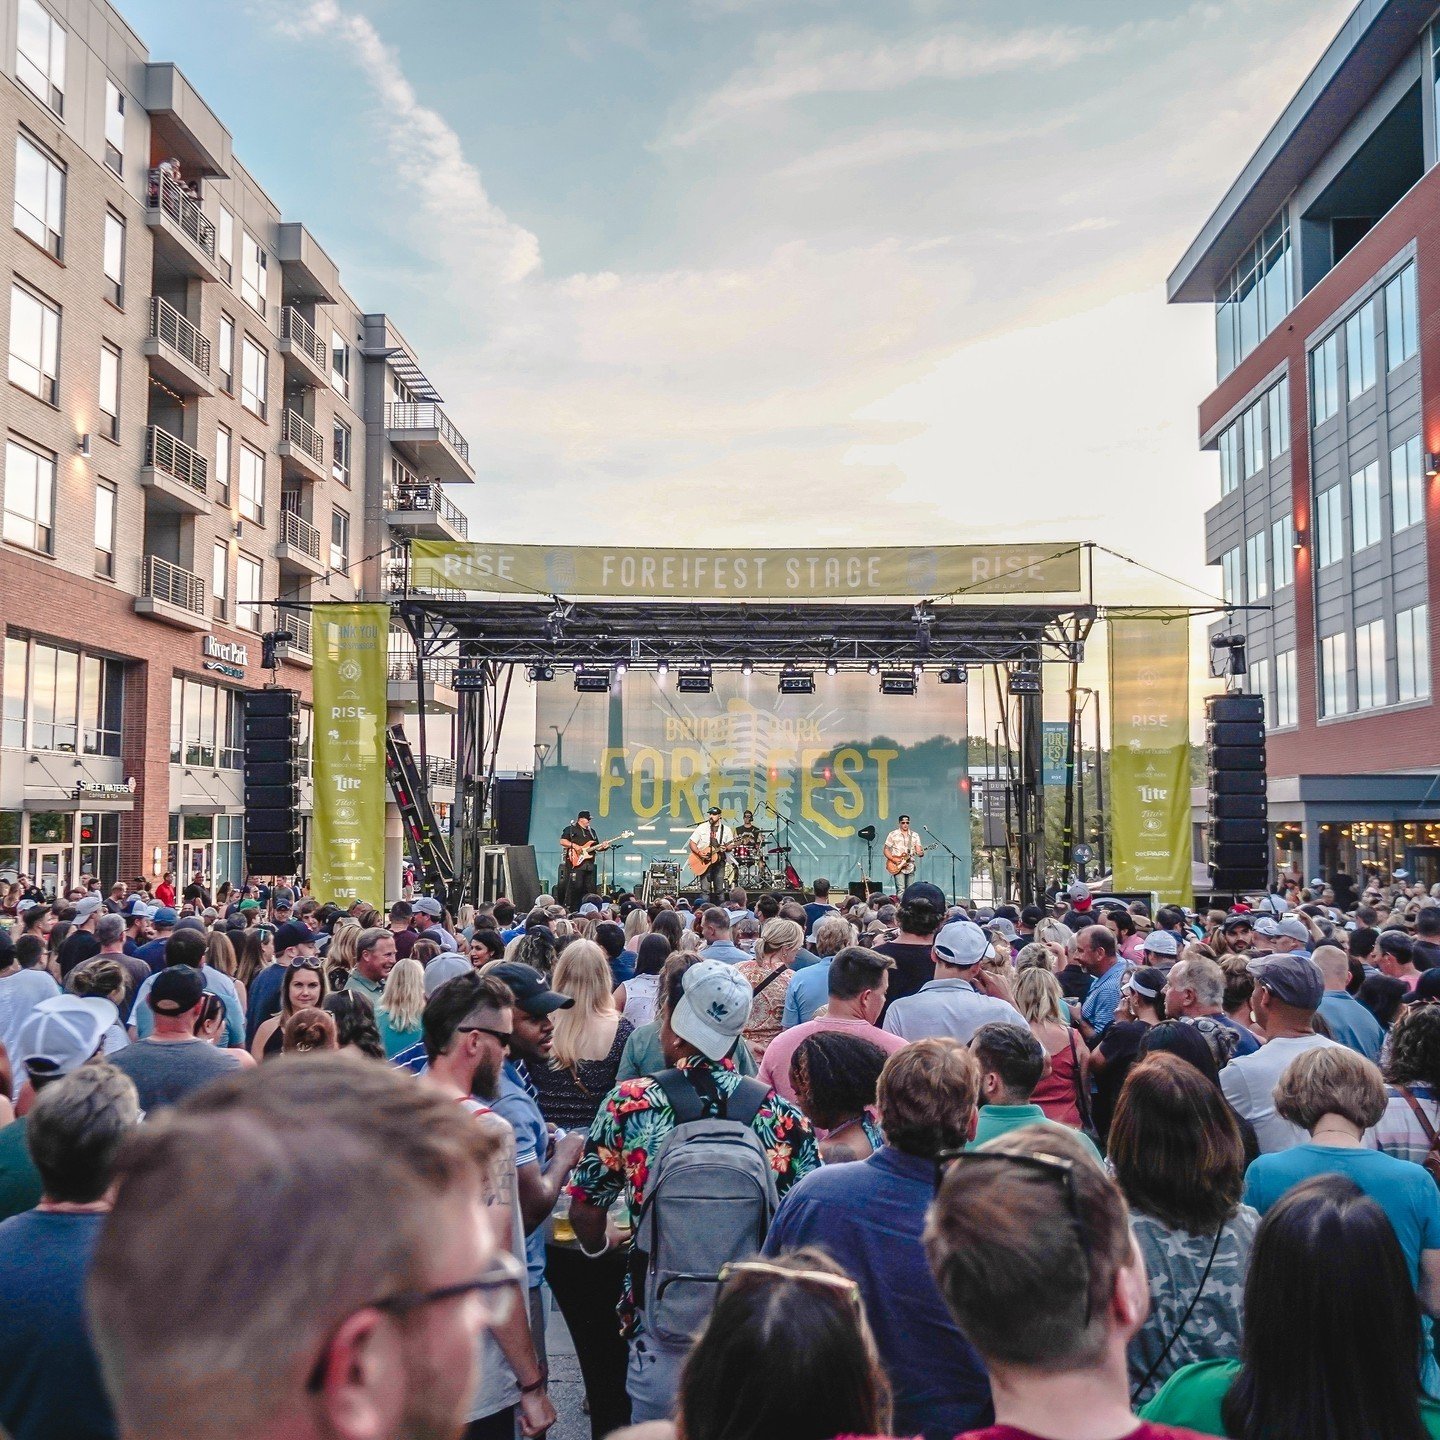 The party of the summer is back at #atbridgepark after @memorialgolf. 

@forefest brought to you by @risebrands is returning on June 7 and 8 from 5-10pm with even more music, dancing, DORA drinks and local vendors. 🎶